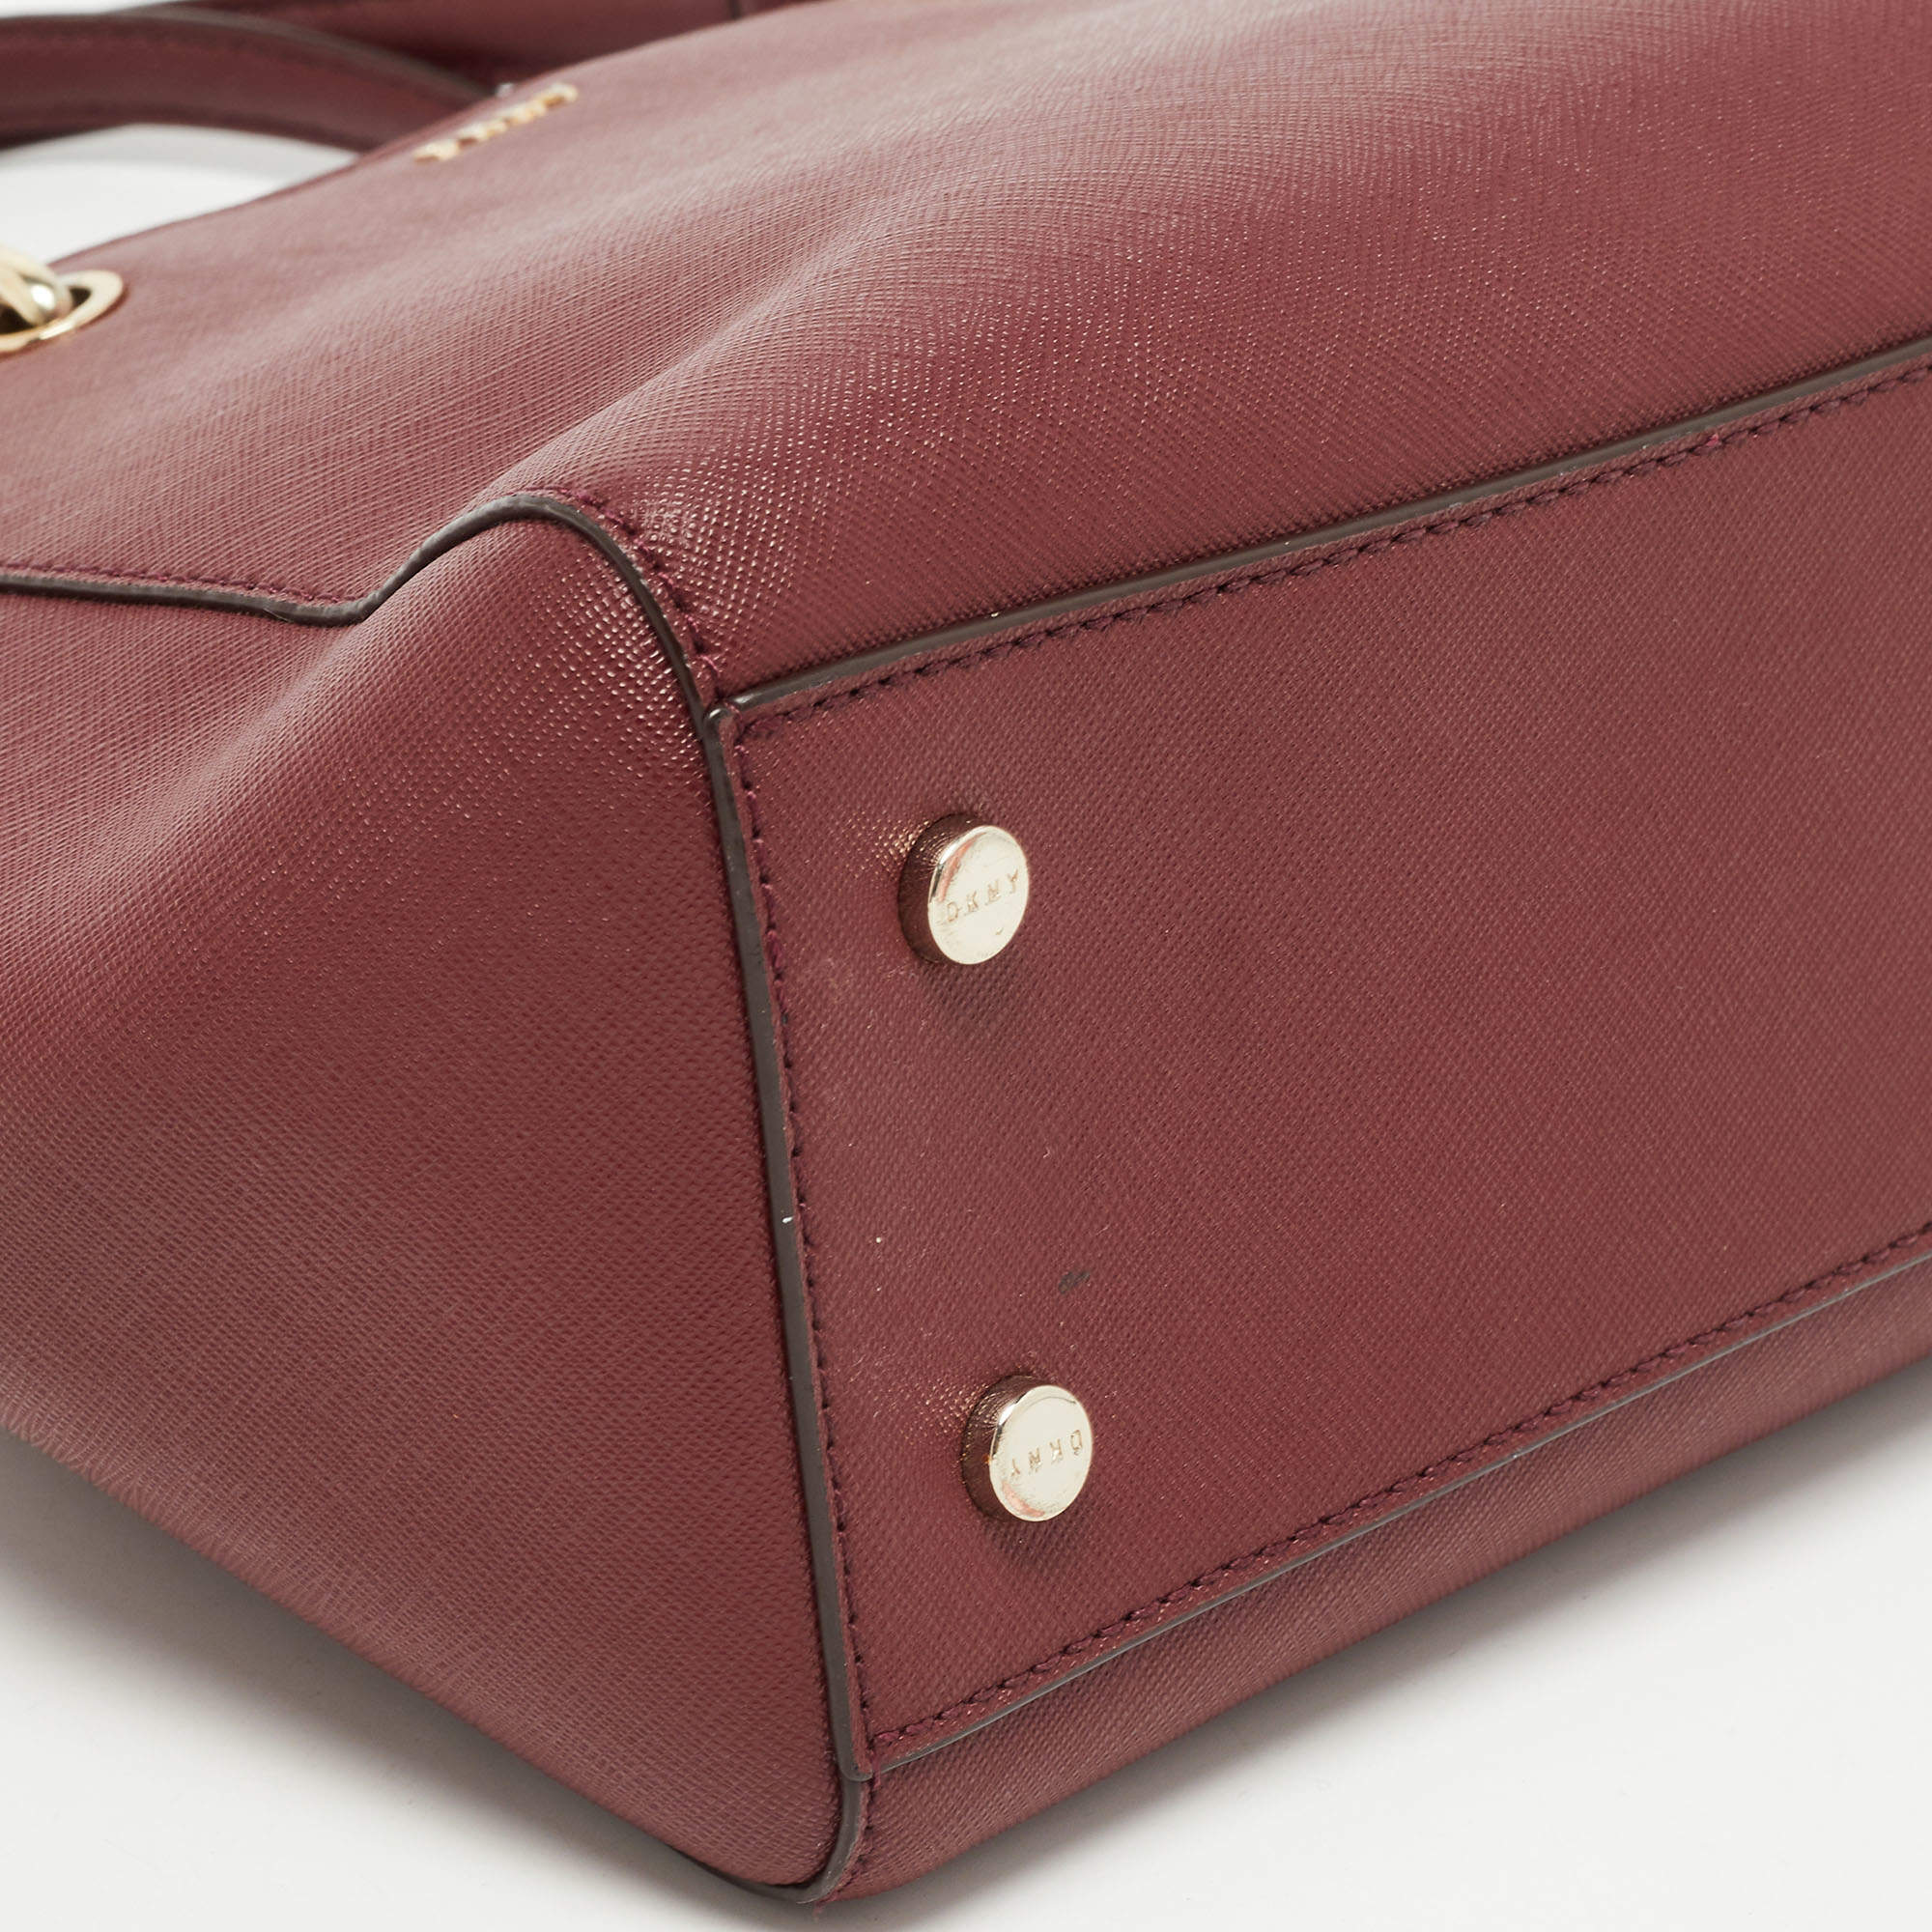 Dkny Burgundy Saffiano Leather Middle Zip Tote